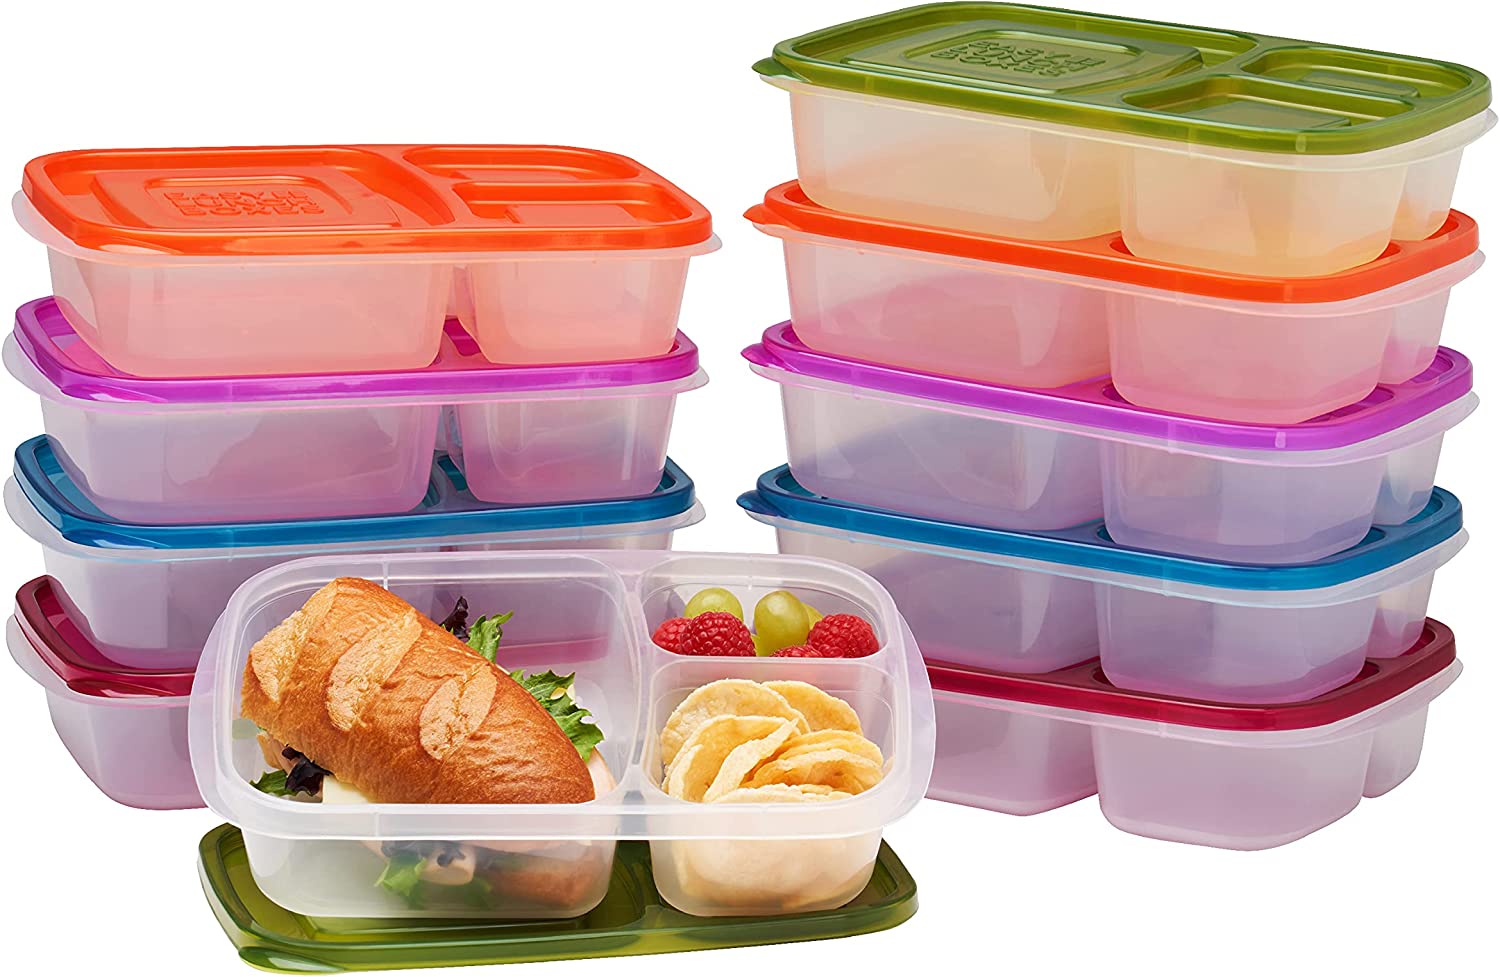 EasyLunchboxes Divided and Stackable Food Container, 10-Pack